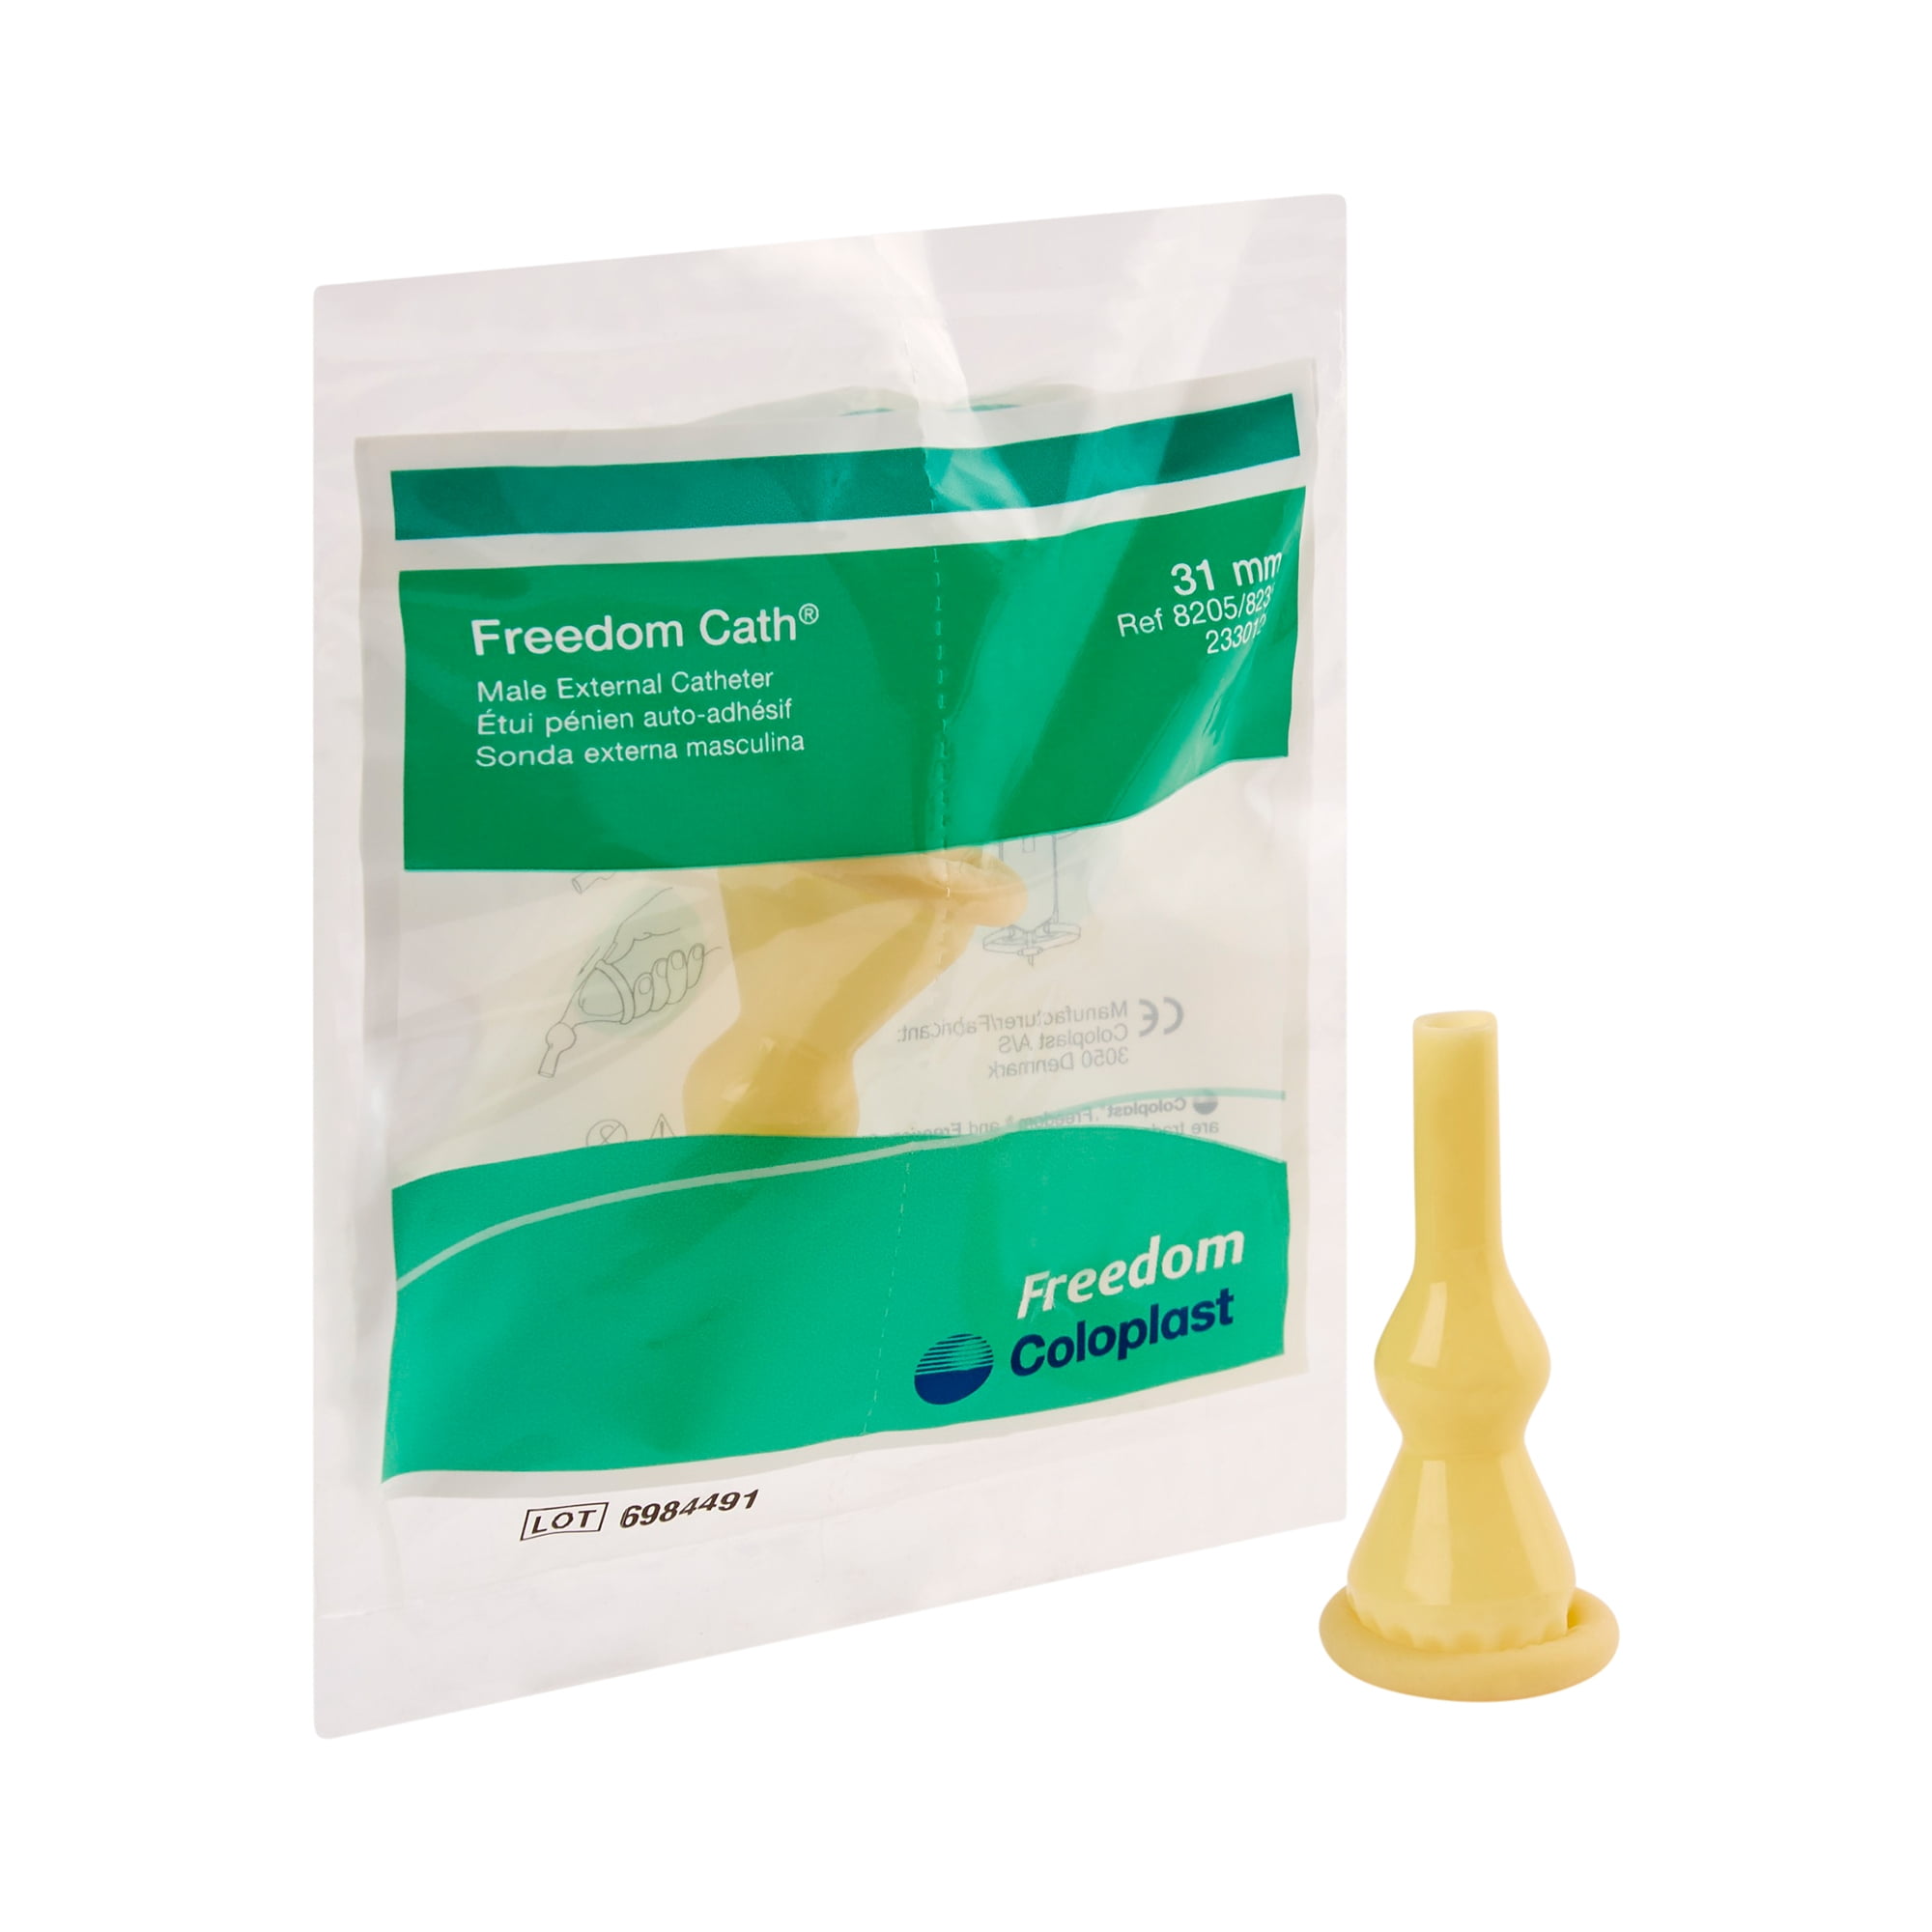 100 Condom Catheters Small 25 mm External Self-Adhering 25mm we have M,L,XL 